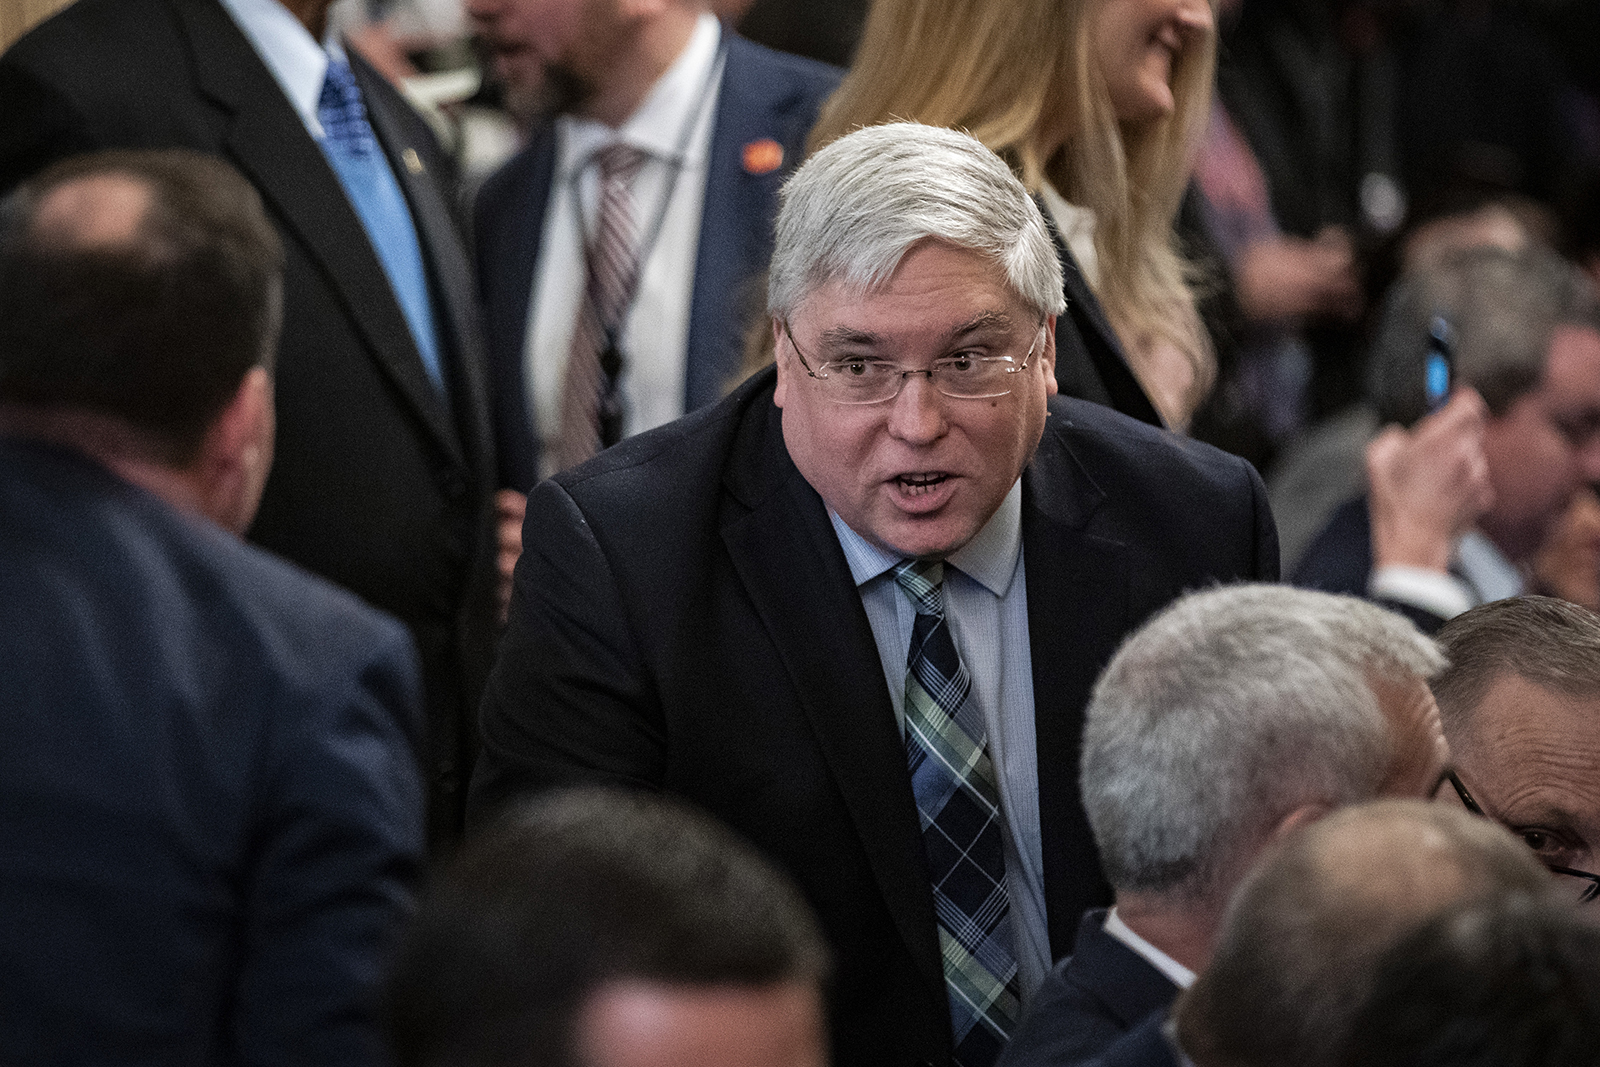 In this Feb. 6, 2020 photo, Patrick Morrisey, attorney general of West Virginia, arrives before an event with President Donald Trump at the White House in Washington.